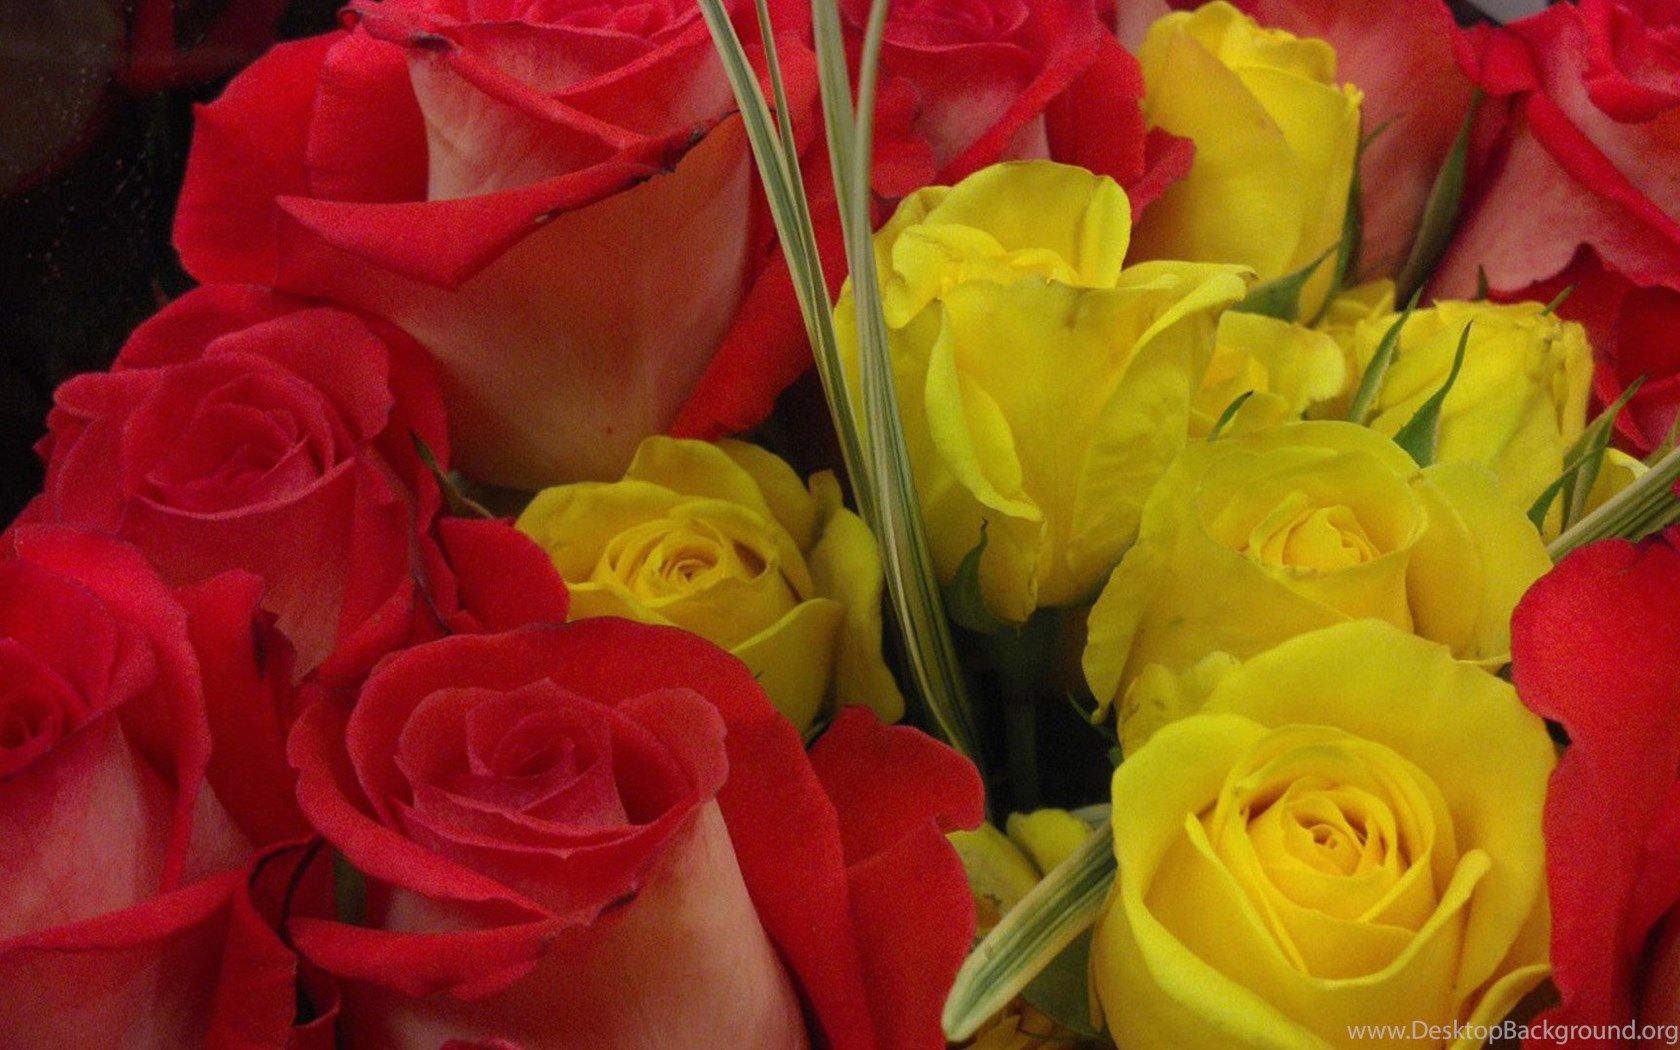 Red And Yellow Rose Bouquet Wallpaper, Rose Flower Image, Rose. Desktop Background